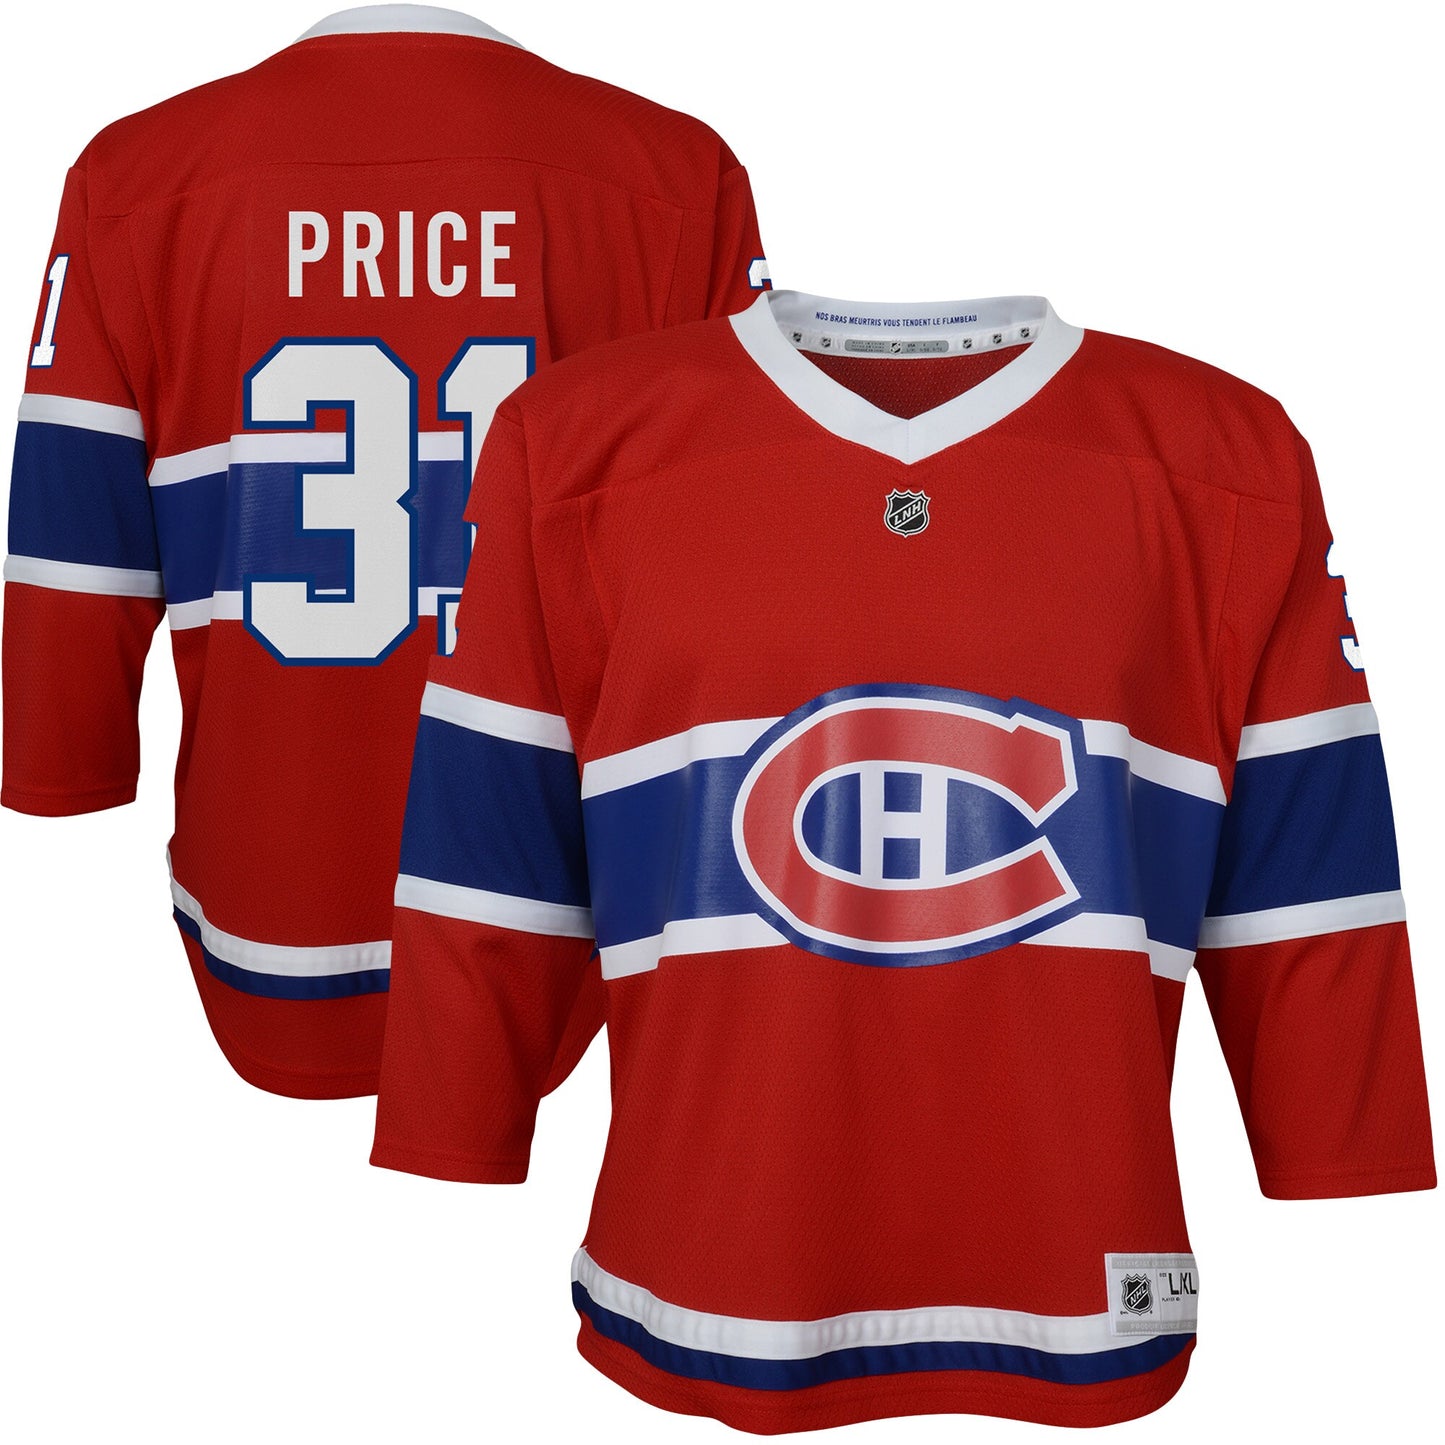 Carey Price Montreal Canadiens Youth Home Replica Player Jersey - Red